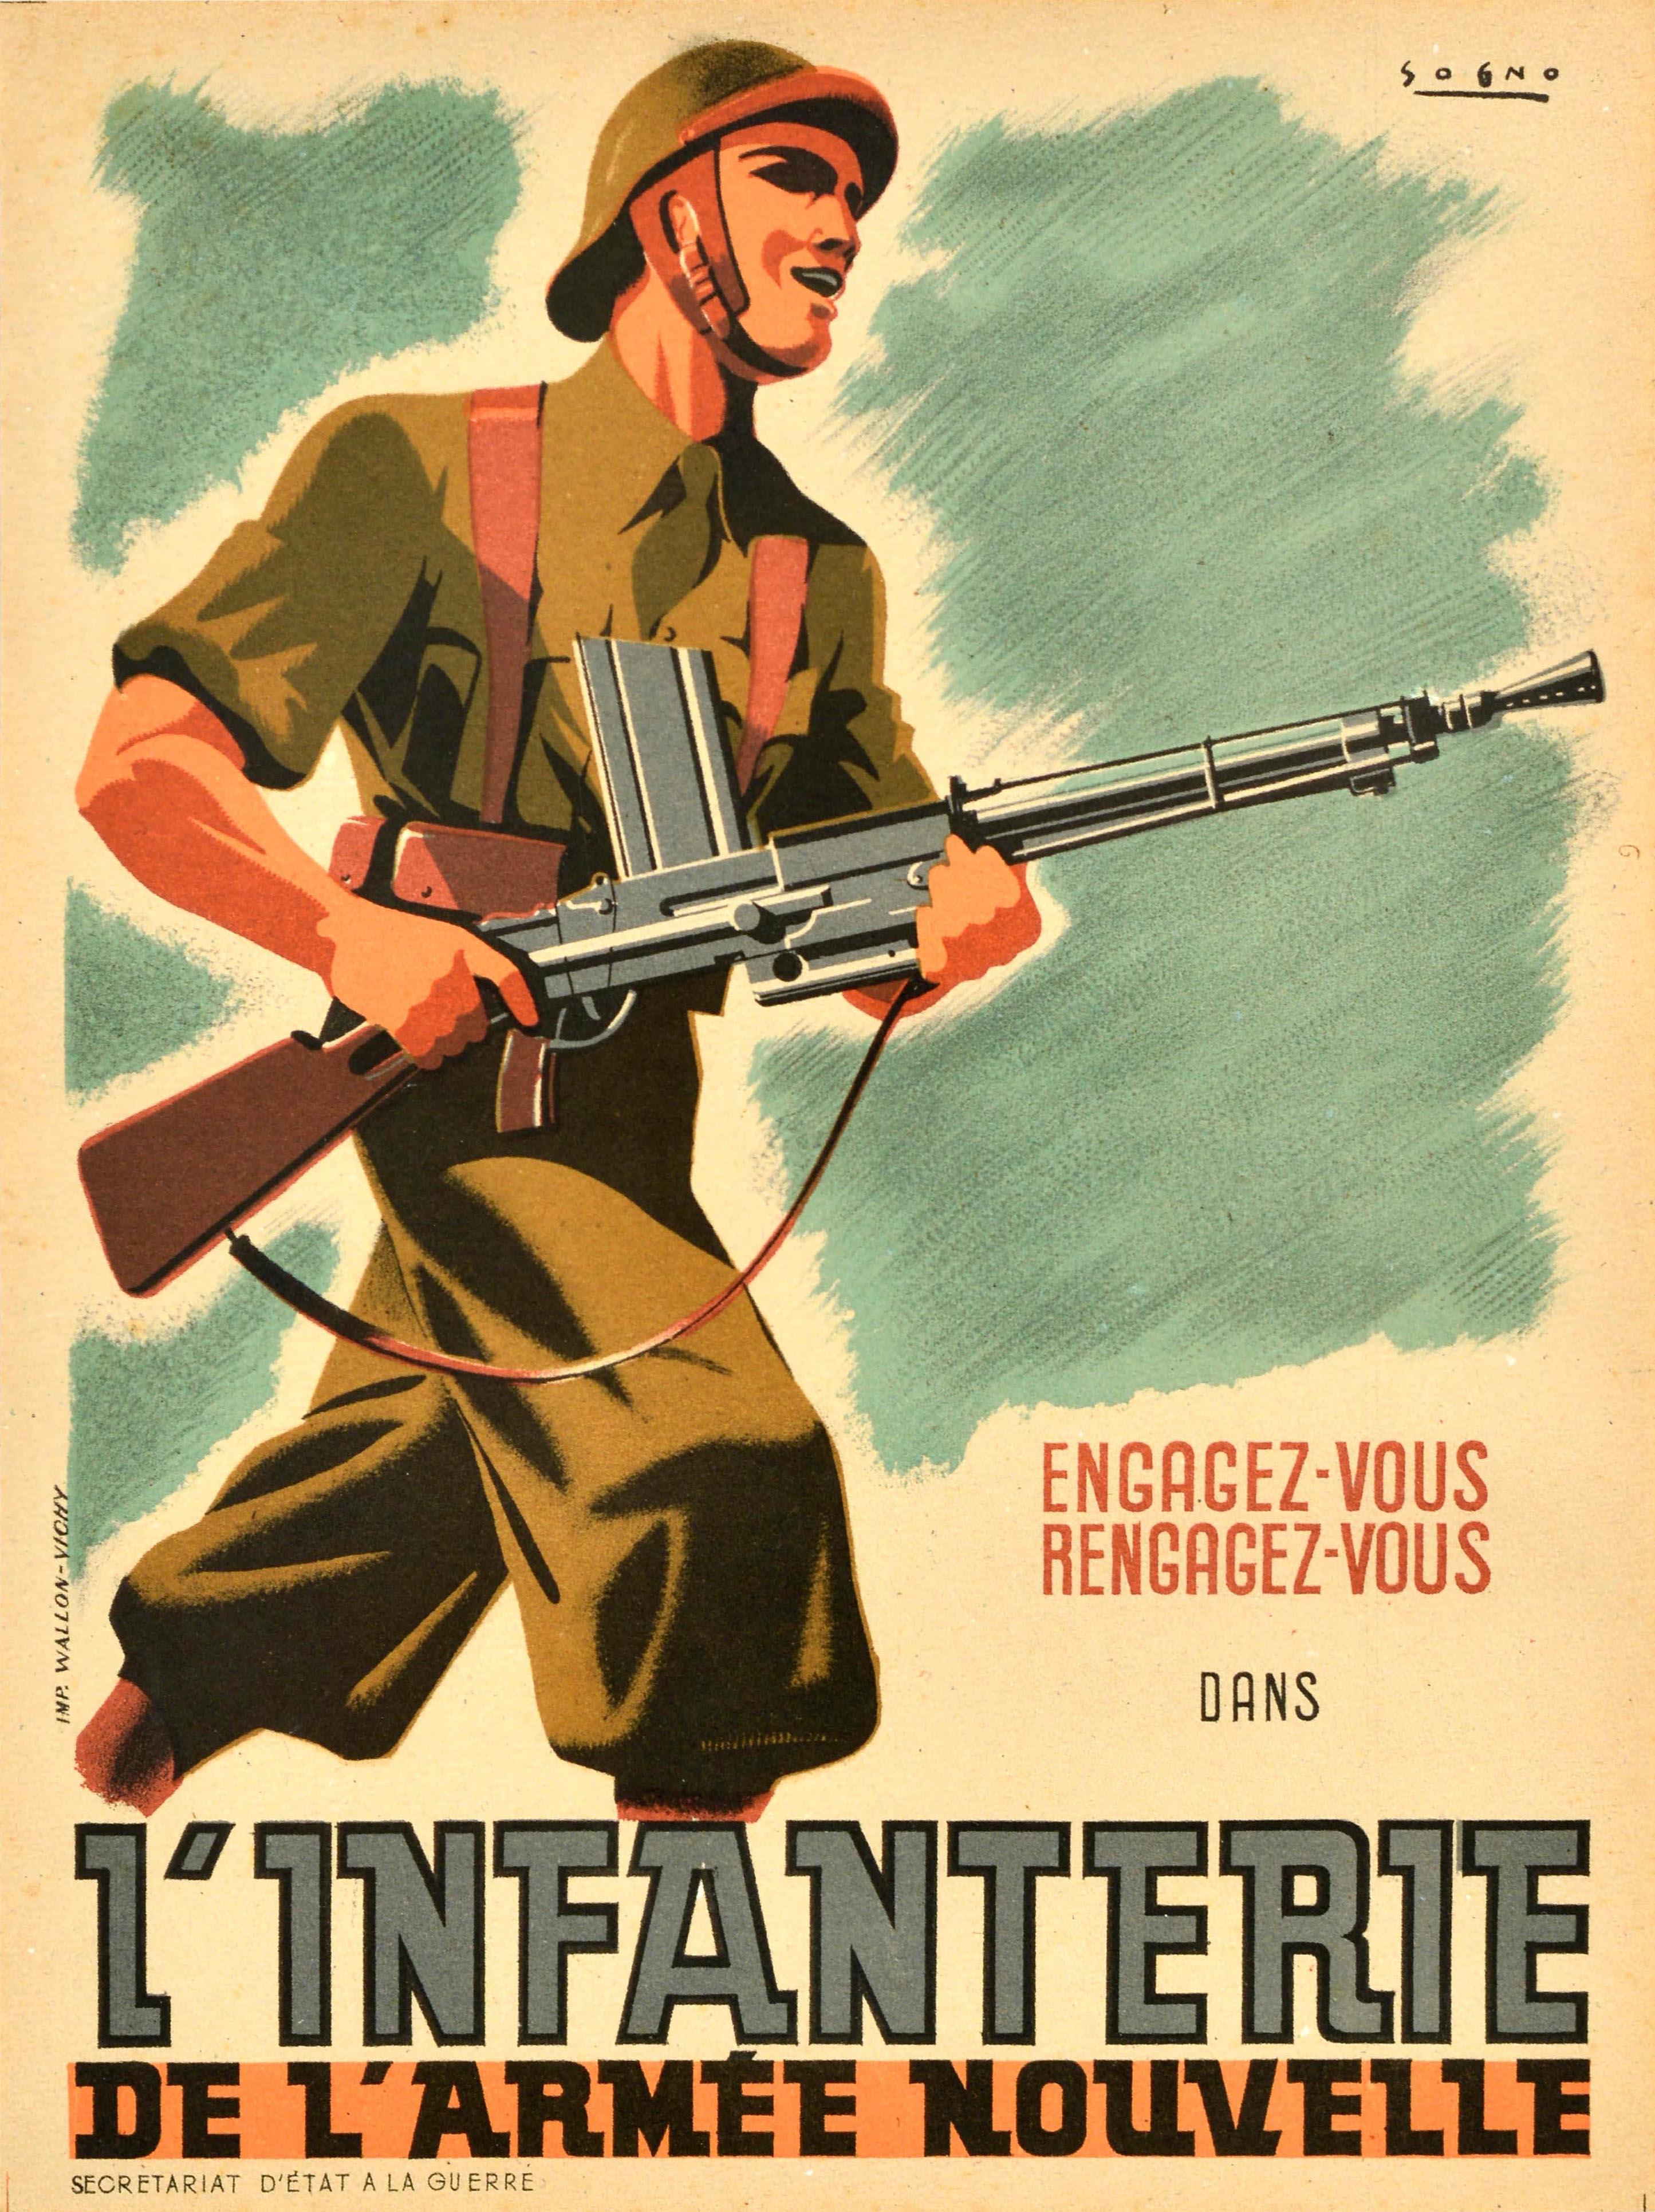 Sogno Print - Original Vintage WWII Poster Join The New Army Infantry l'Infanterie De l'Armee